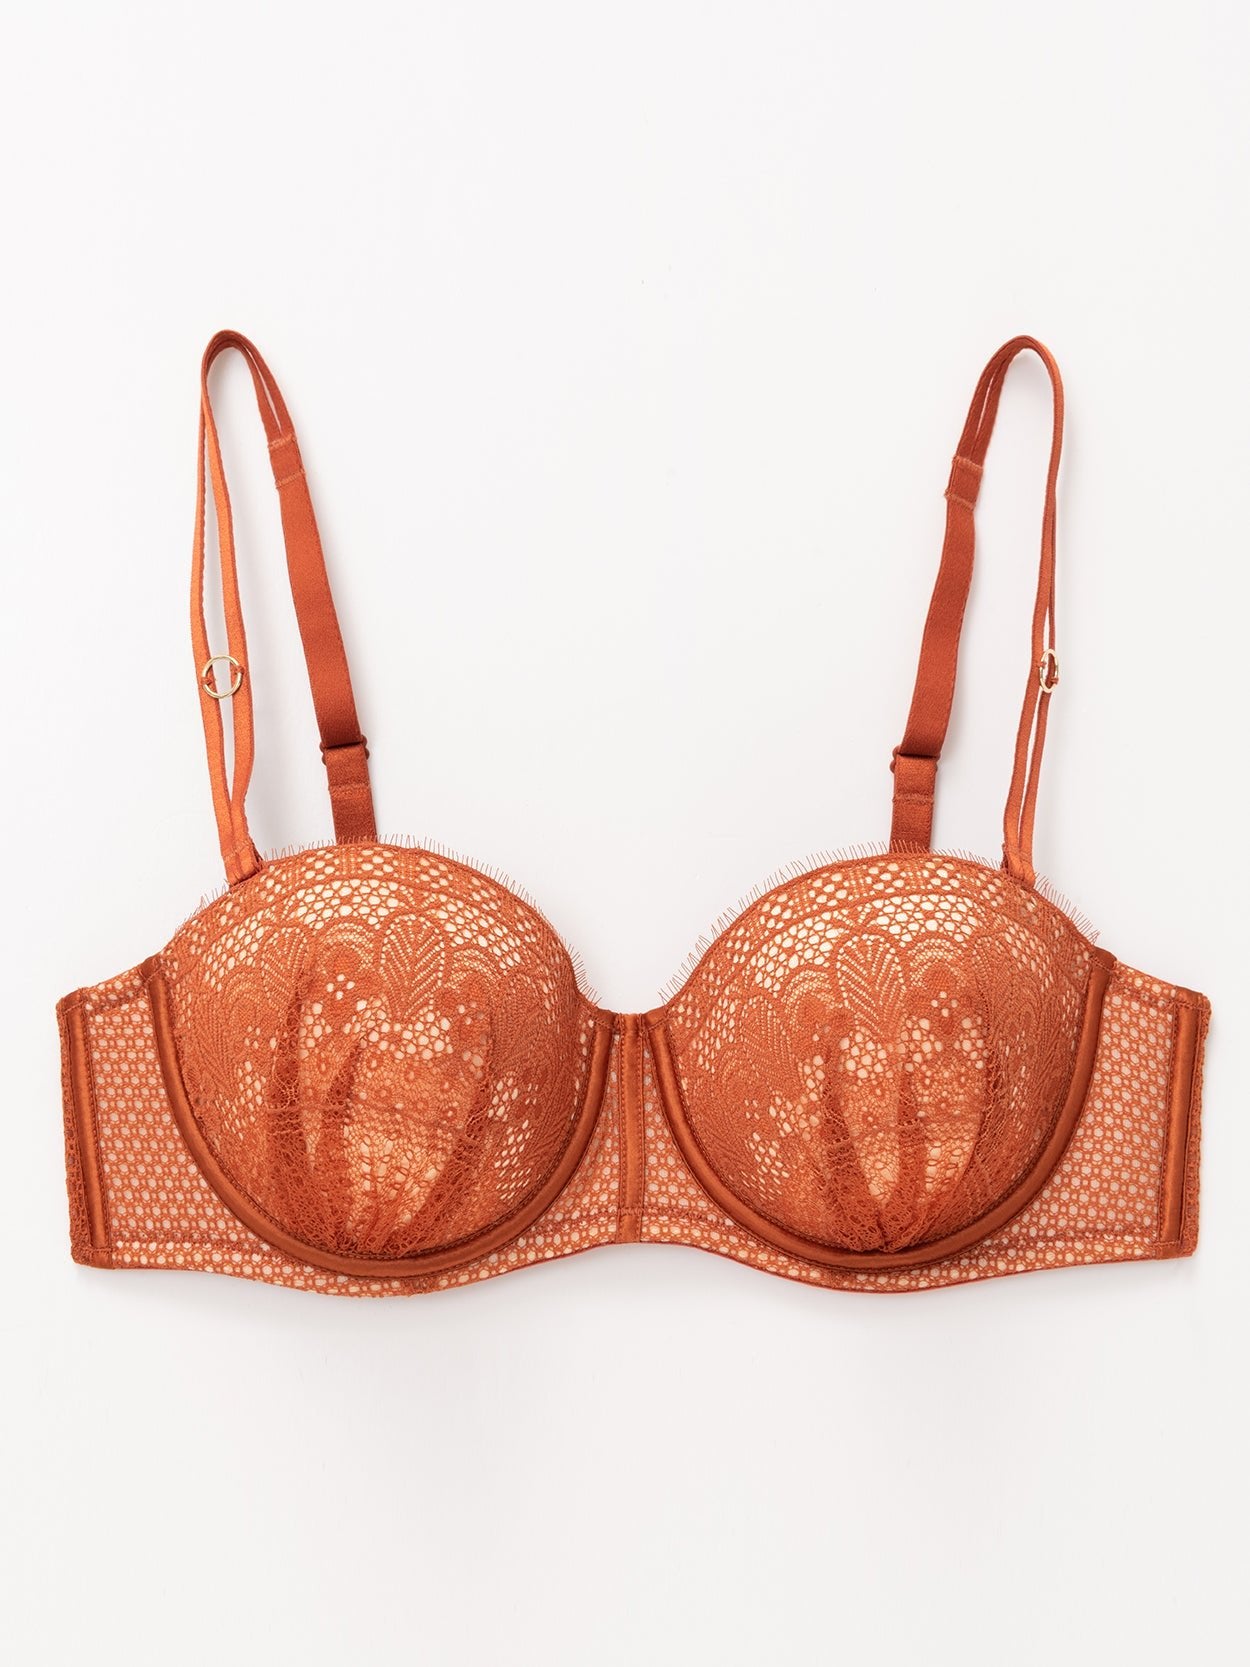 Push Up Full Figure Strapless Pleated Lace Multiway Bra Caramel